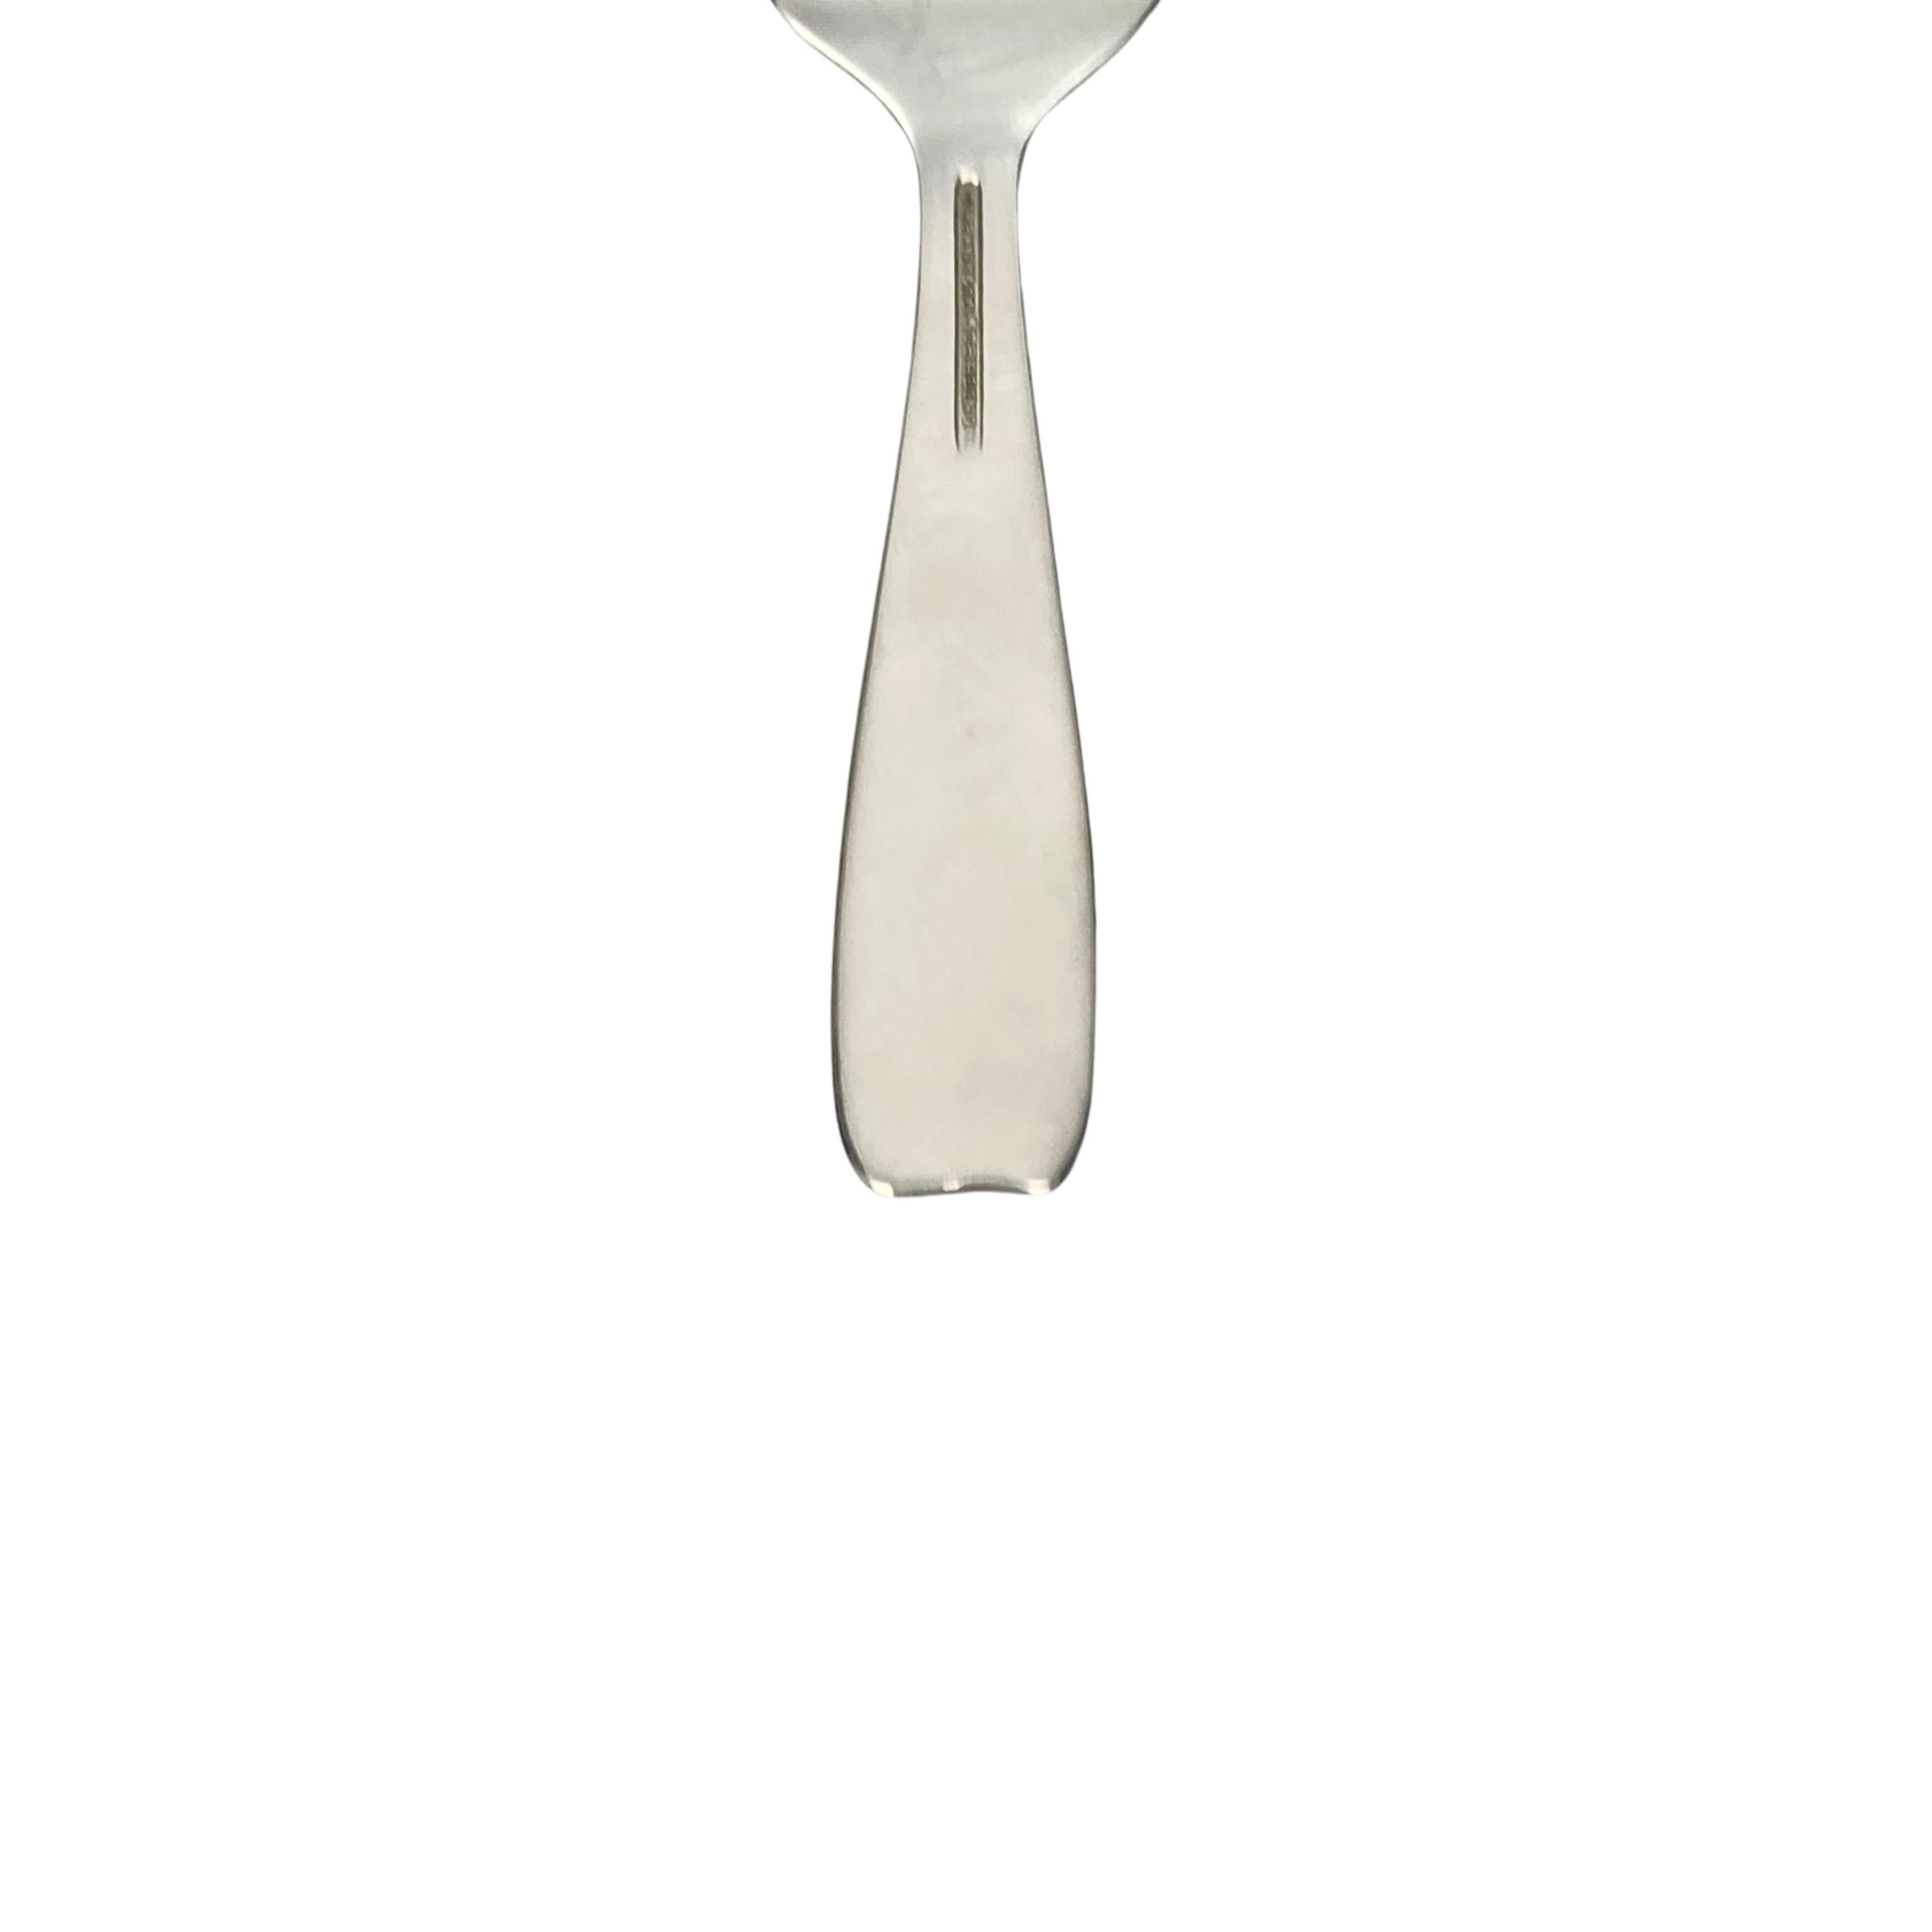 Tiffany & Co Cordis Sterling Silver Baby/Child Feeding Fork #15487 For Sale 1